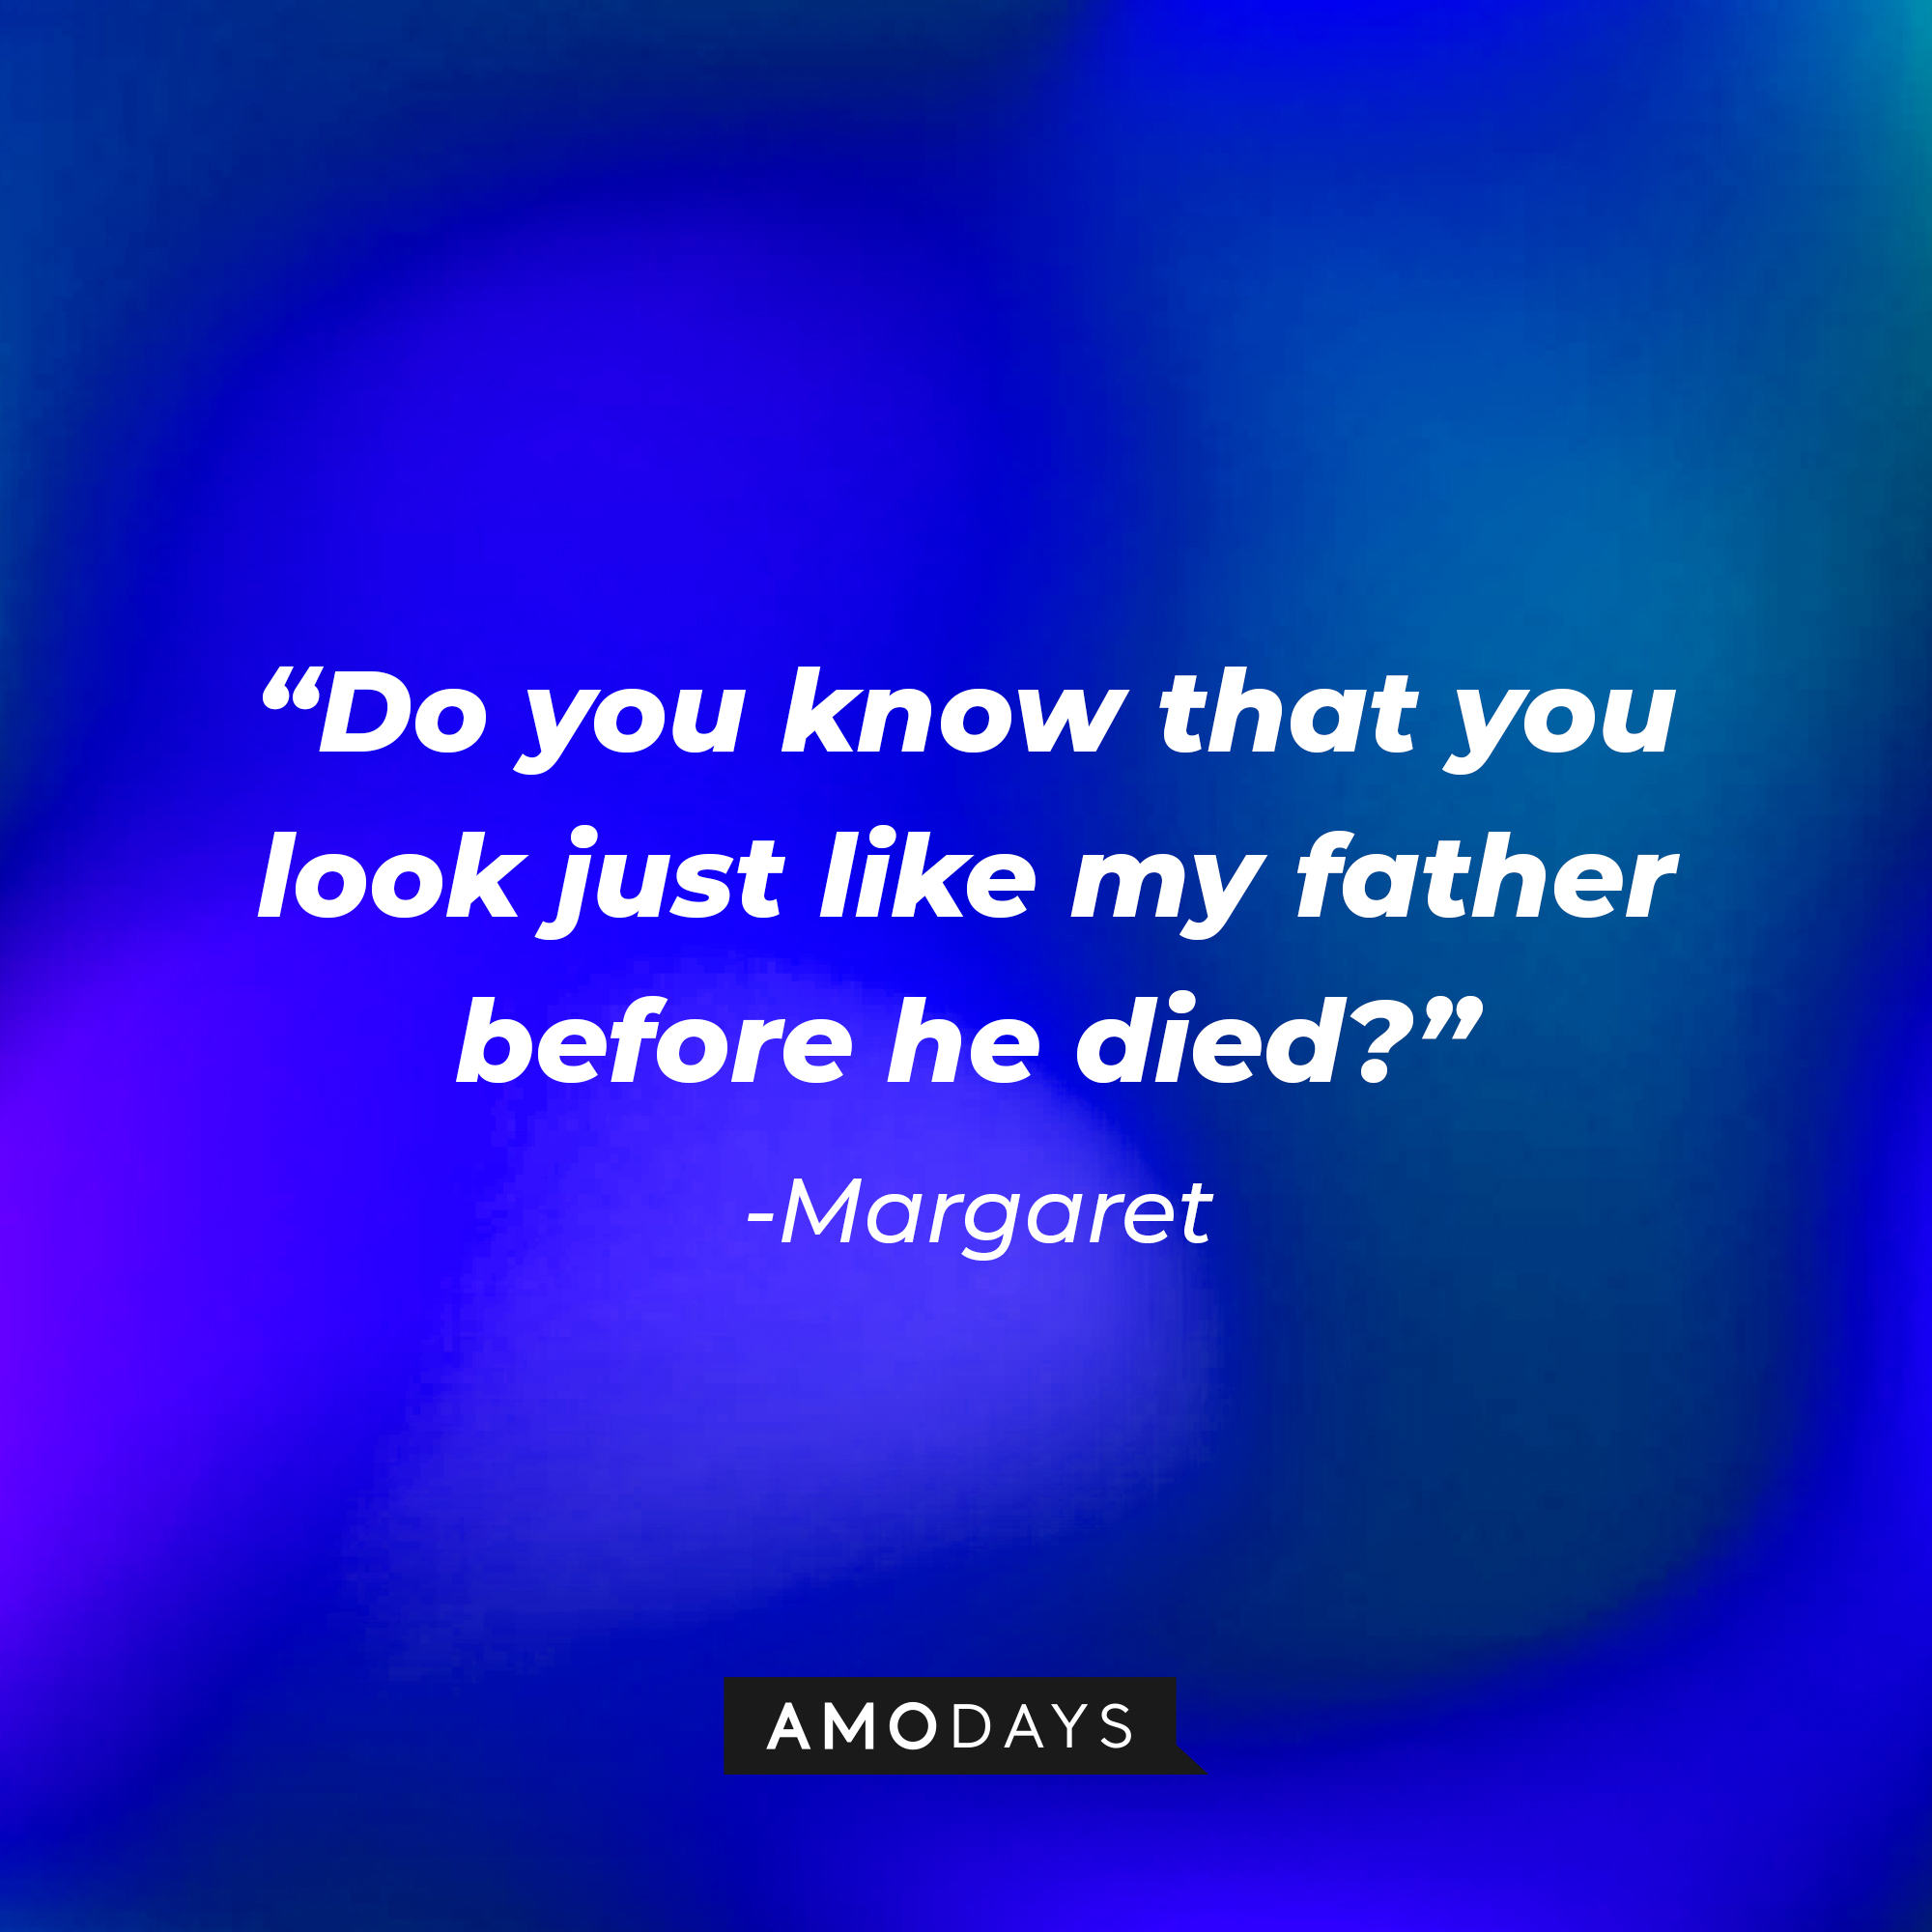 Margaret’s quote: “Do you know that you look just like my father before he died?” | Source: AmoDays